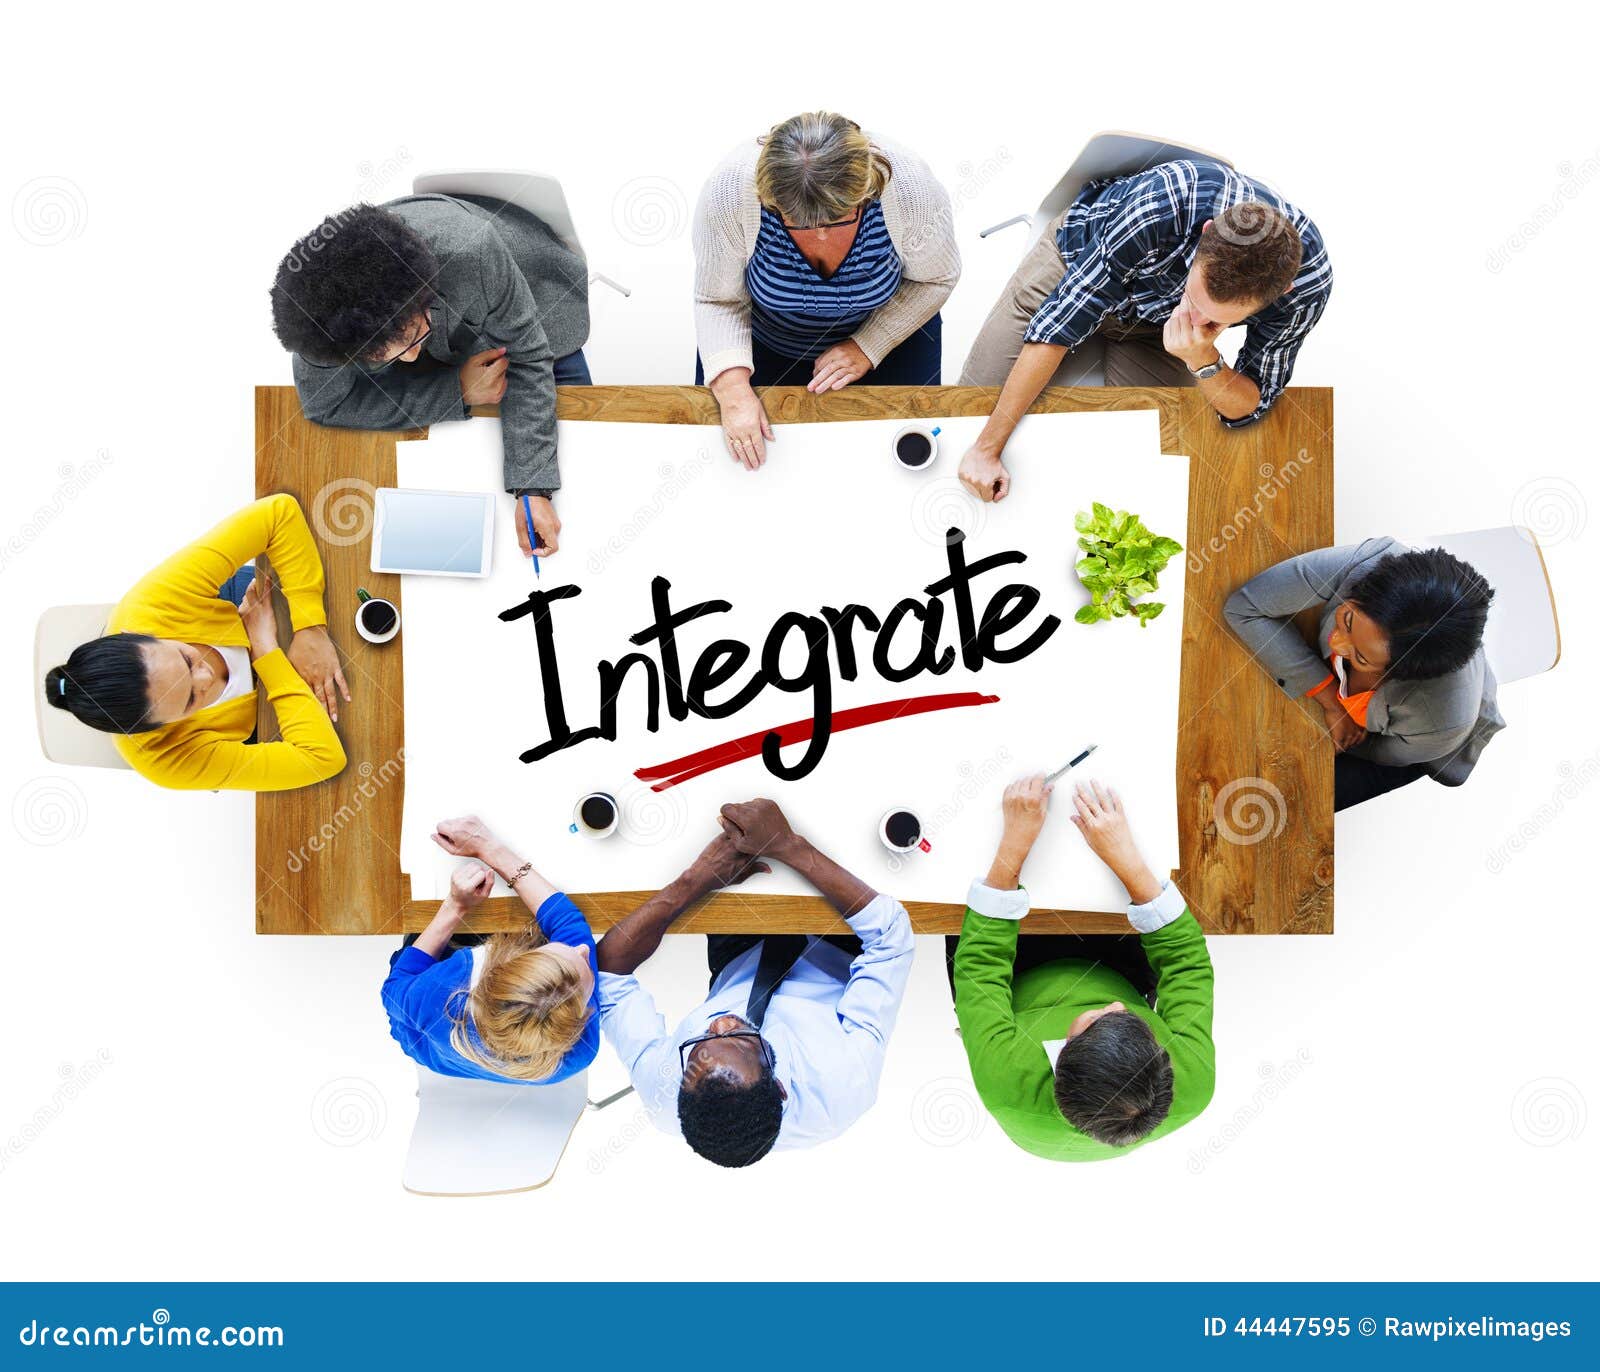 group of people brainstorming about integrate concept